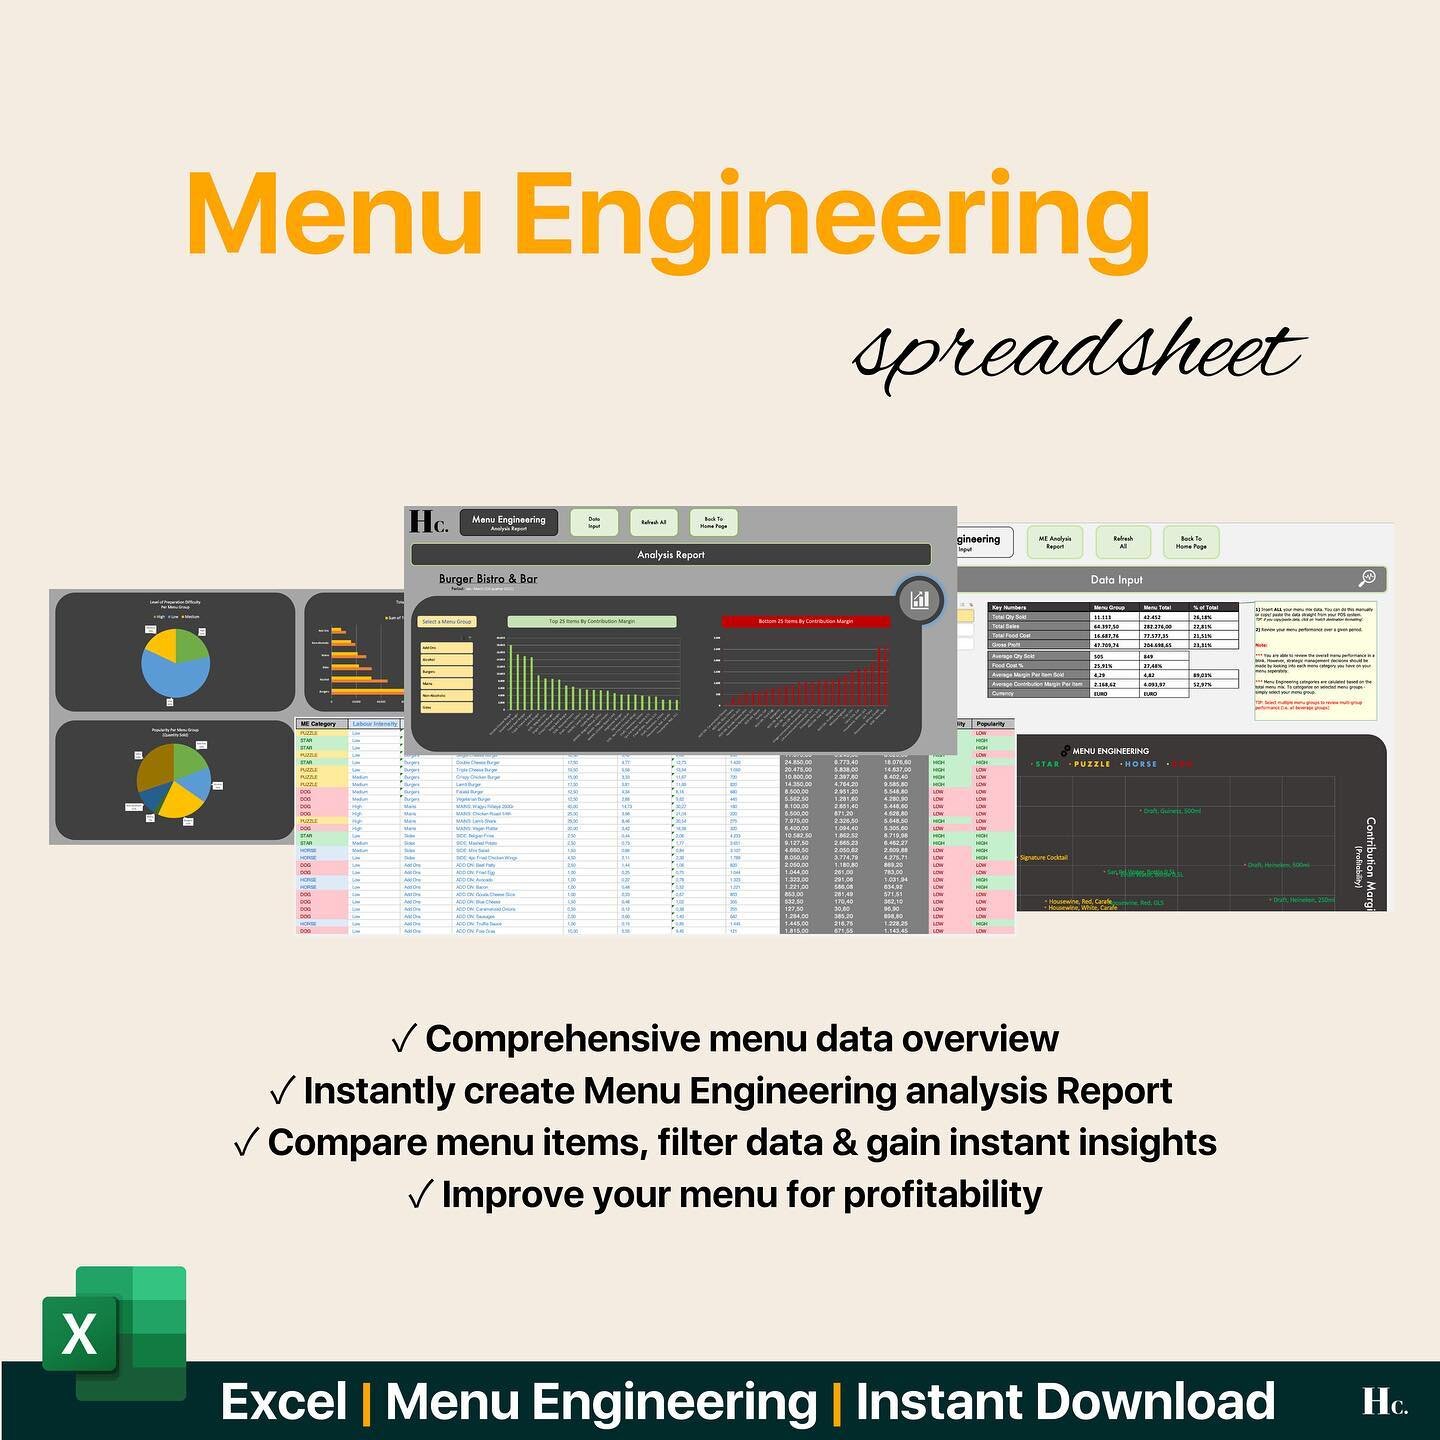 We are excited to present our new Menu Engineering Tool! 🚀

This Excel Template is perfect for restaurants, bars, and cafes that want to analyze and optimize their menu's profitability.

The Template offers an automated analysis of each item's perfo